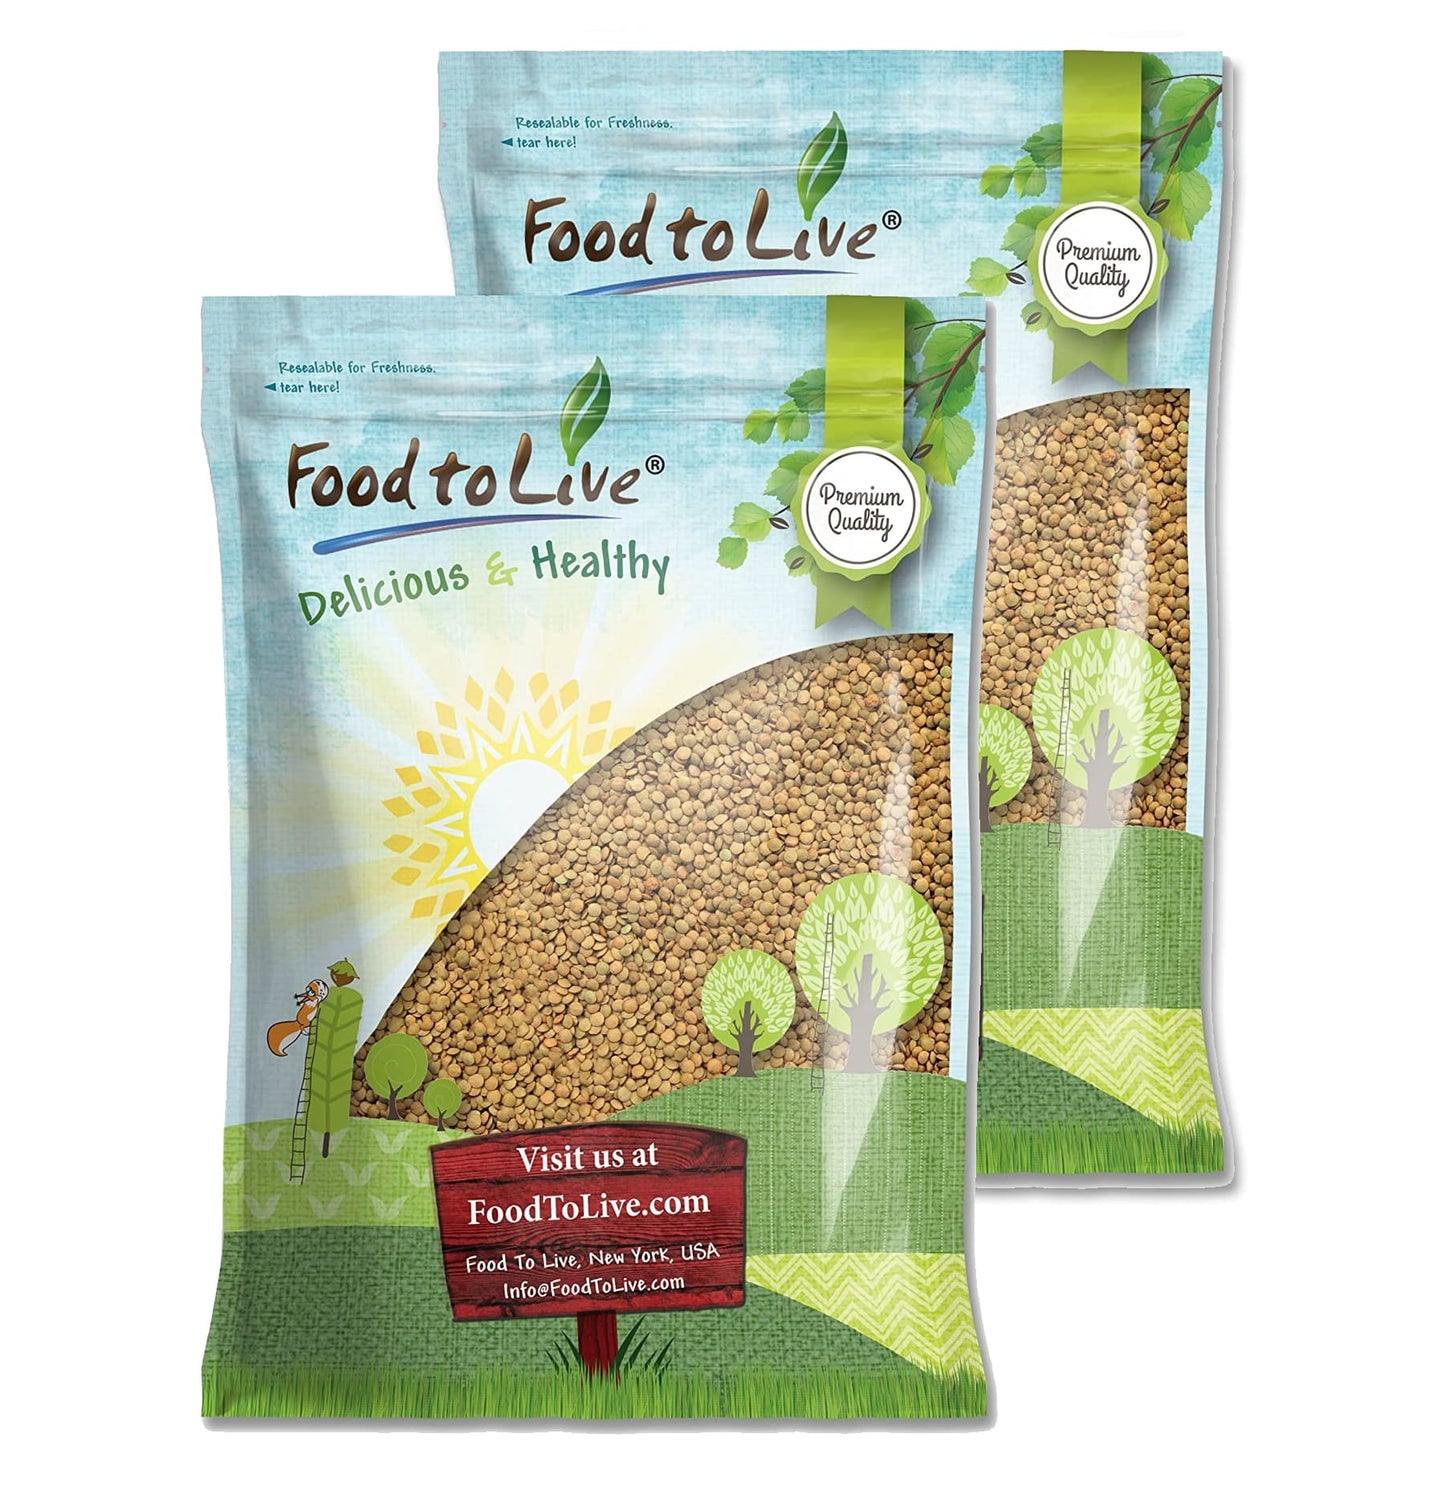 Green Lentil Whole — Non-GMO Verified, Kosher, Bulk - by Food to Live